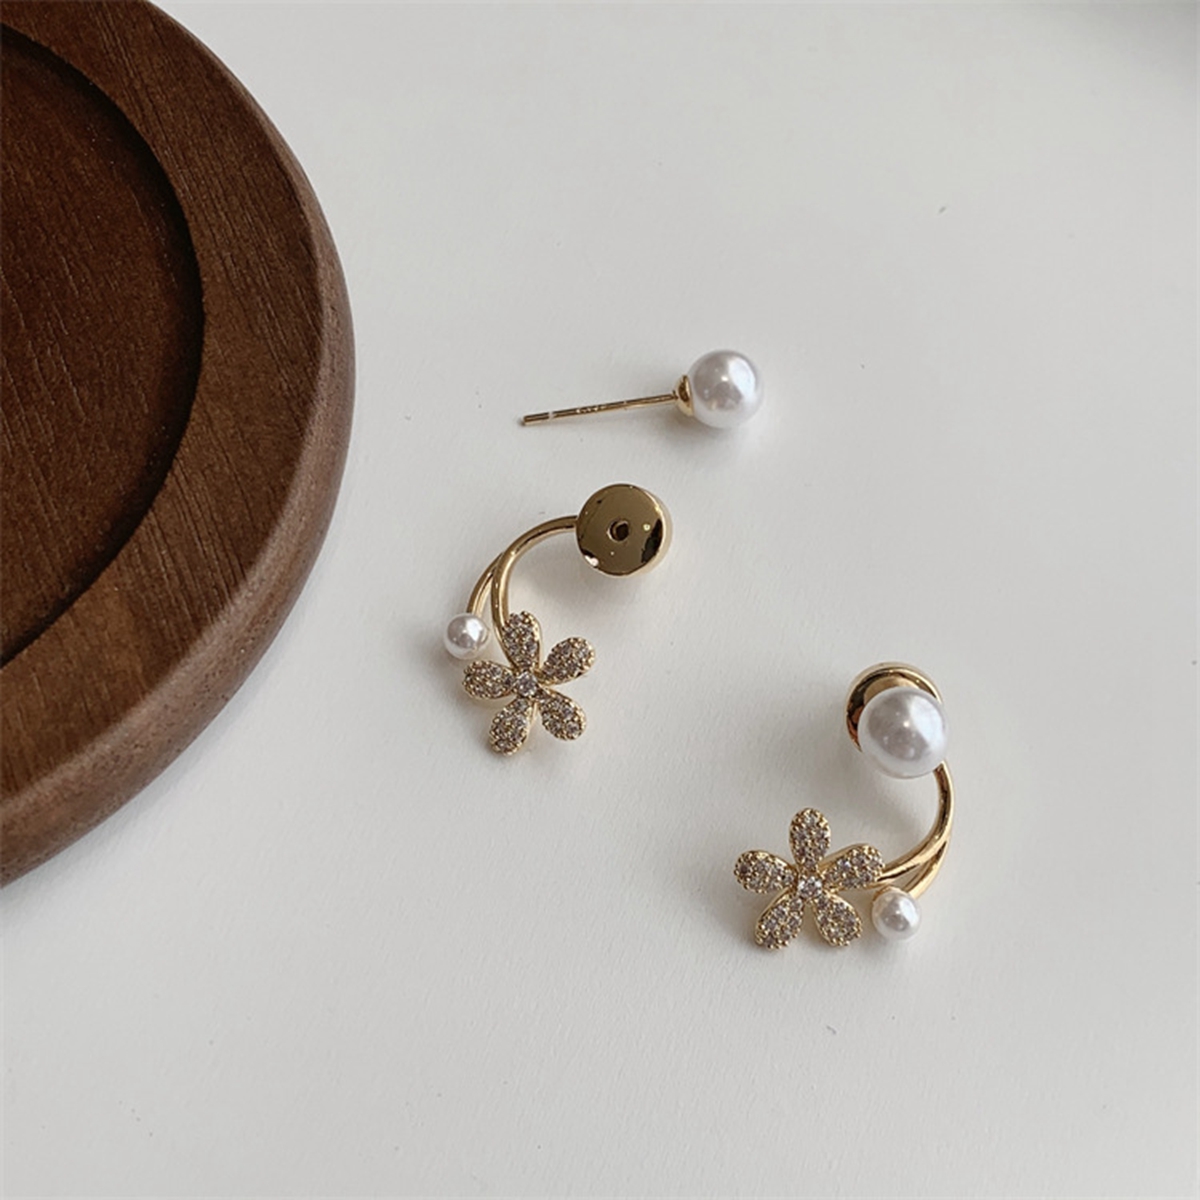 12st Ny Imitation Pearl Flower Charm Earrings for Women Fashion Crystal Elegant Jewelry Party Gifts